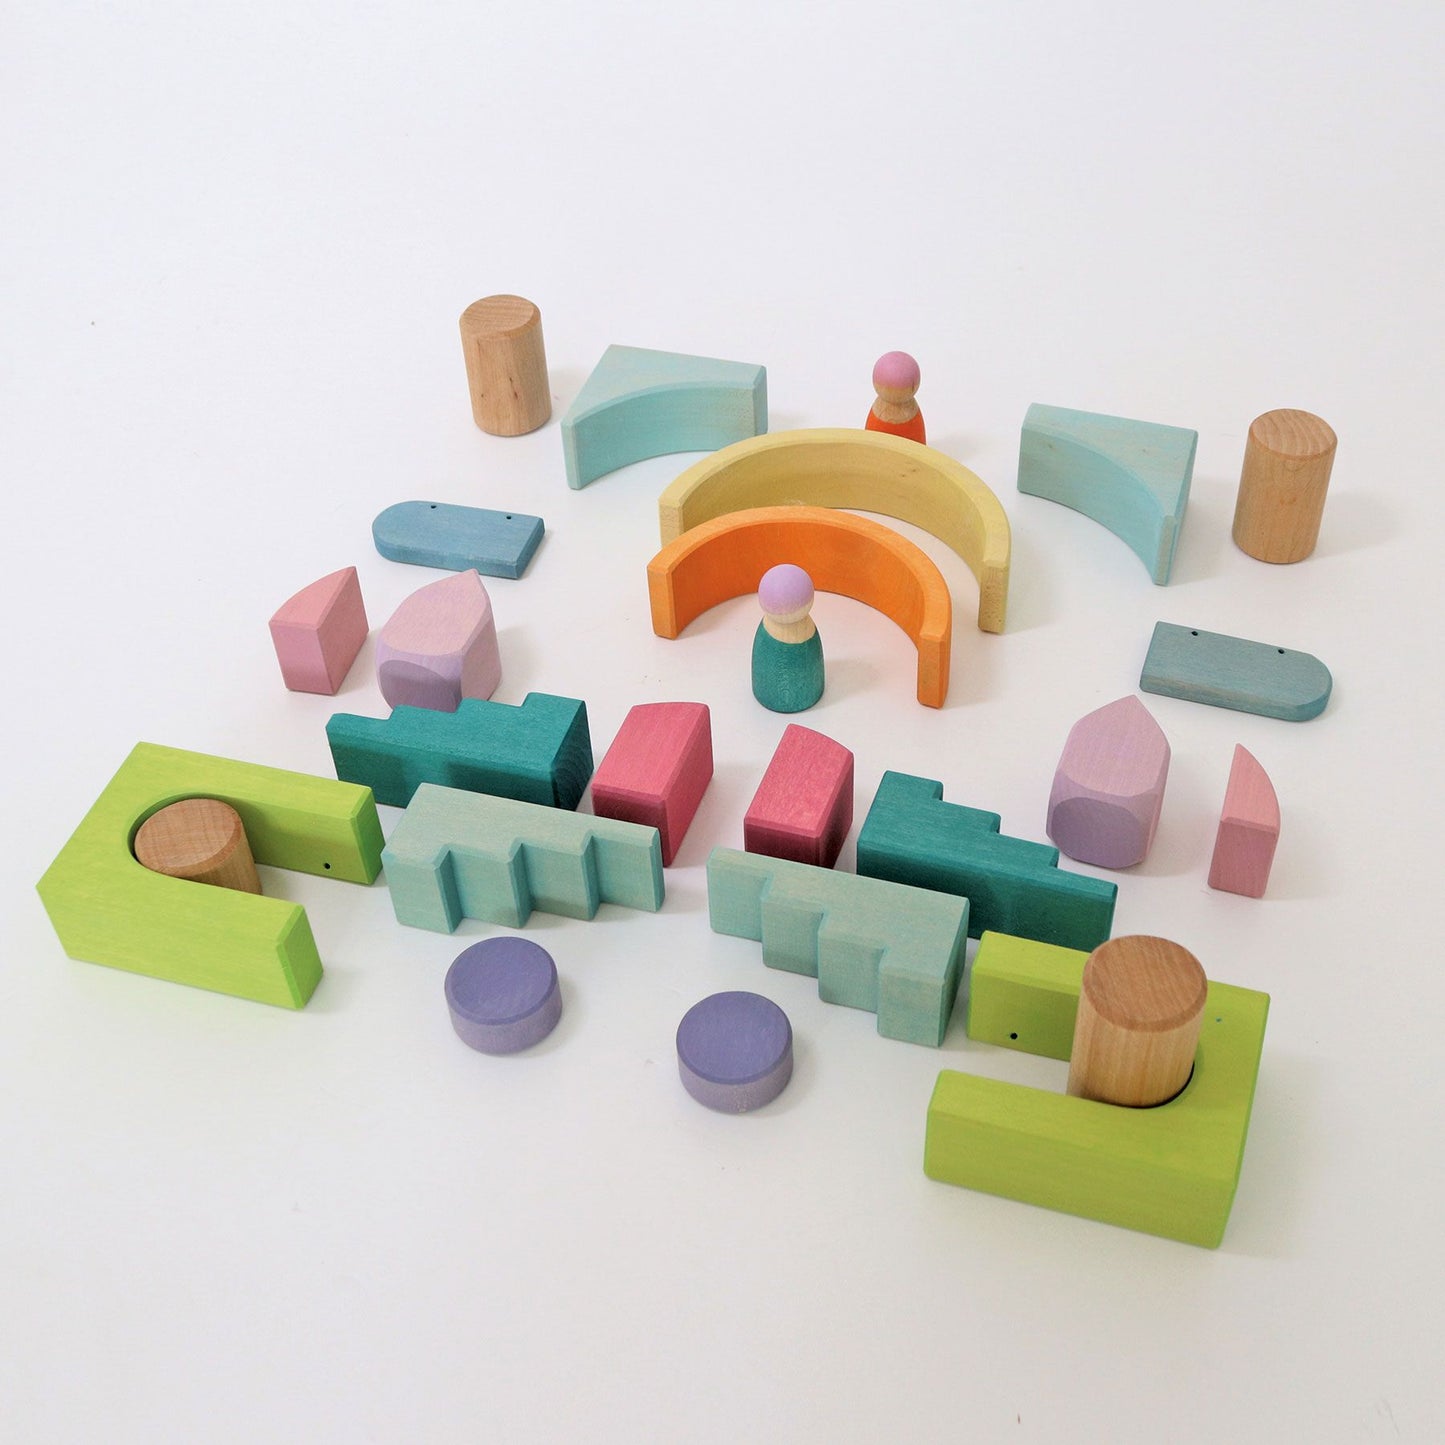 Building World Cloud Play | Small World Playset | Wooden Toys for Kids | Open-Ended Play